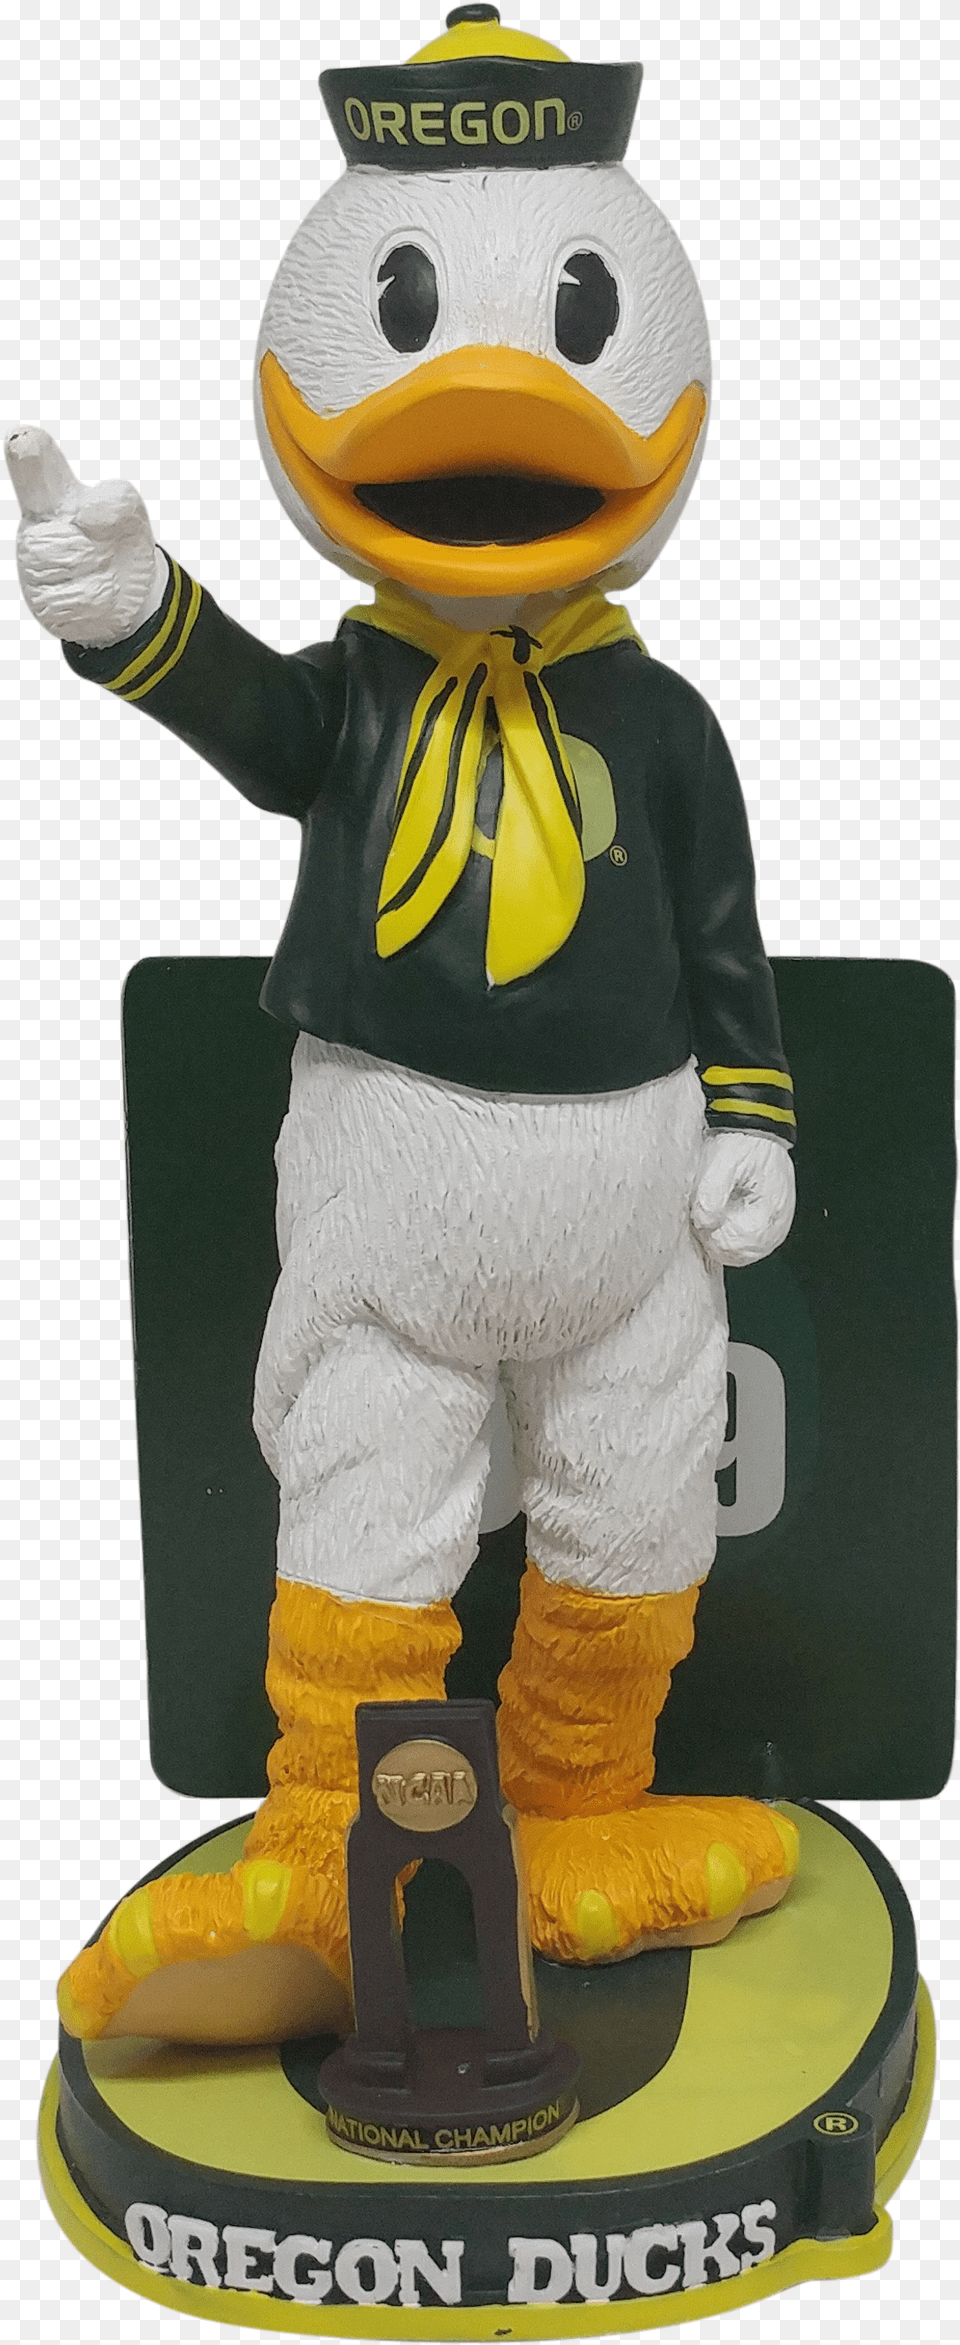 Puddles The Duck Oregon Ncaa Men S Basketball Nat Champ, Mascot, Clothing, Glove, Baby Png